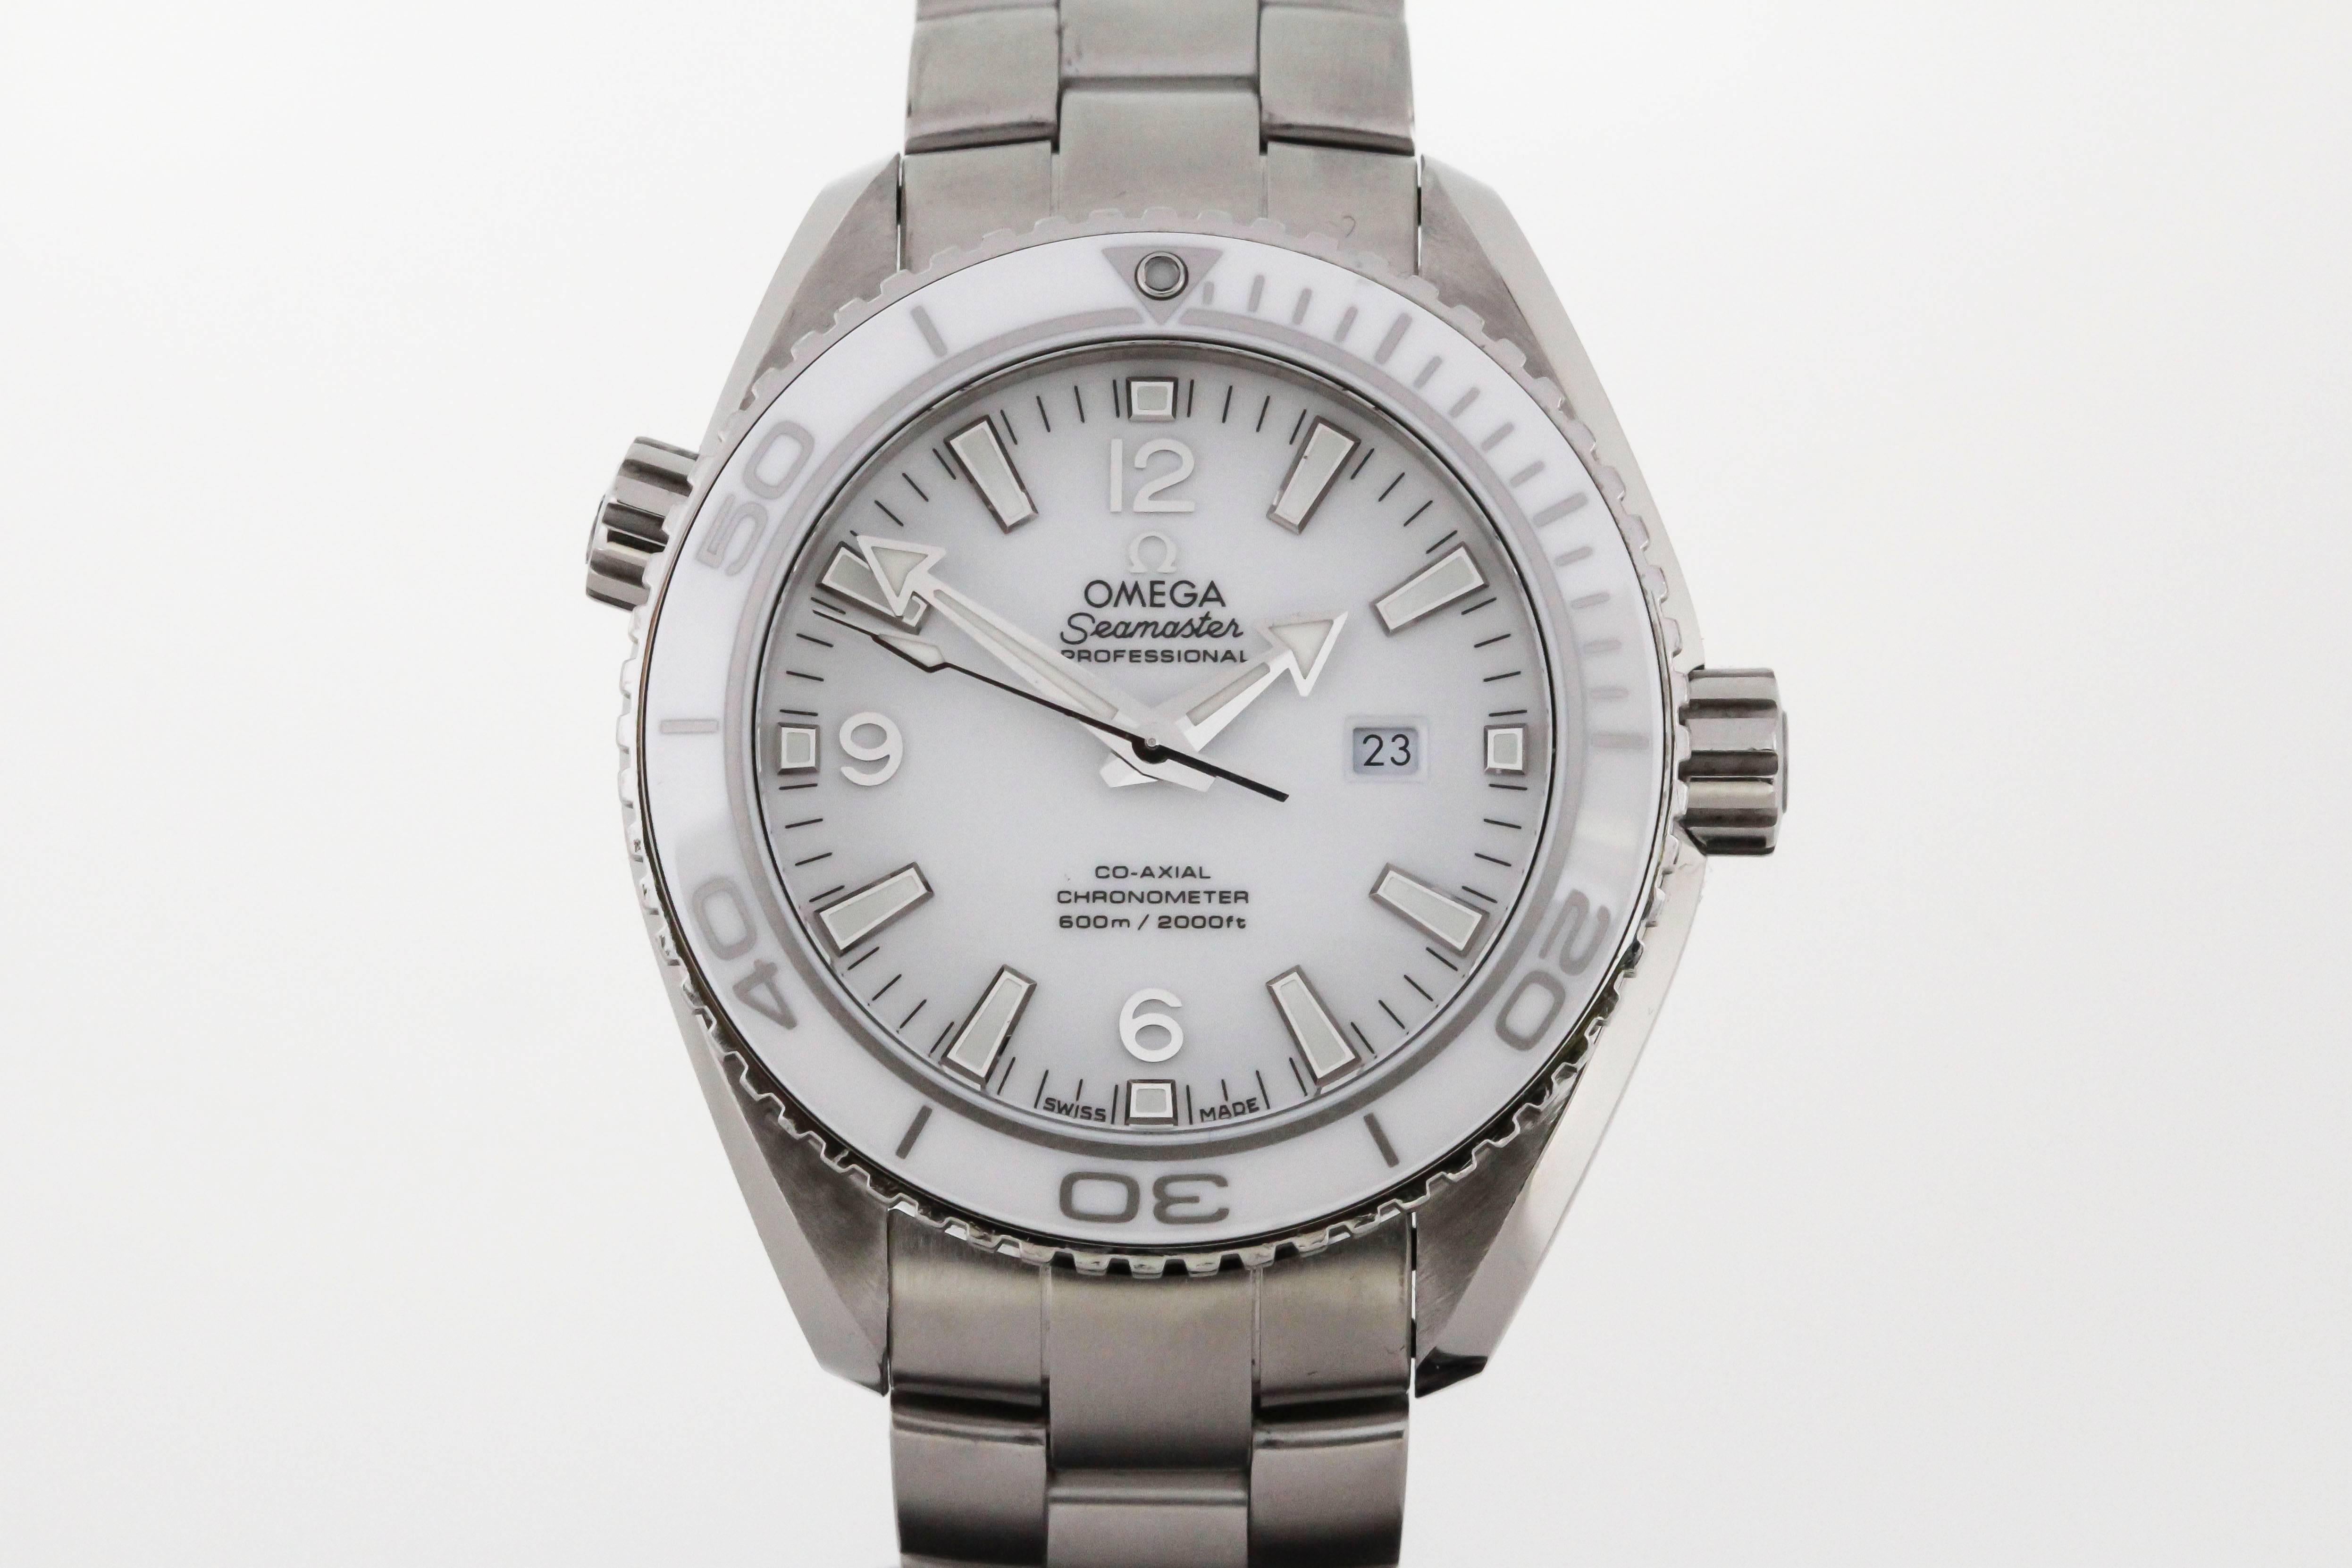 This Omega Seamaster has a beautiful 37mm stainless steel case with an exhibition back showing the automatic movement.  Has a bold white dial and bezel. Comes on a brushed stainless steel bracelet with deployant clasp.